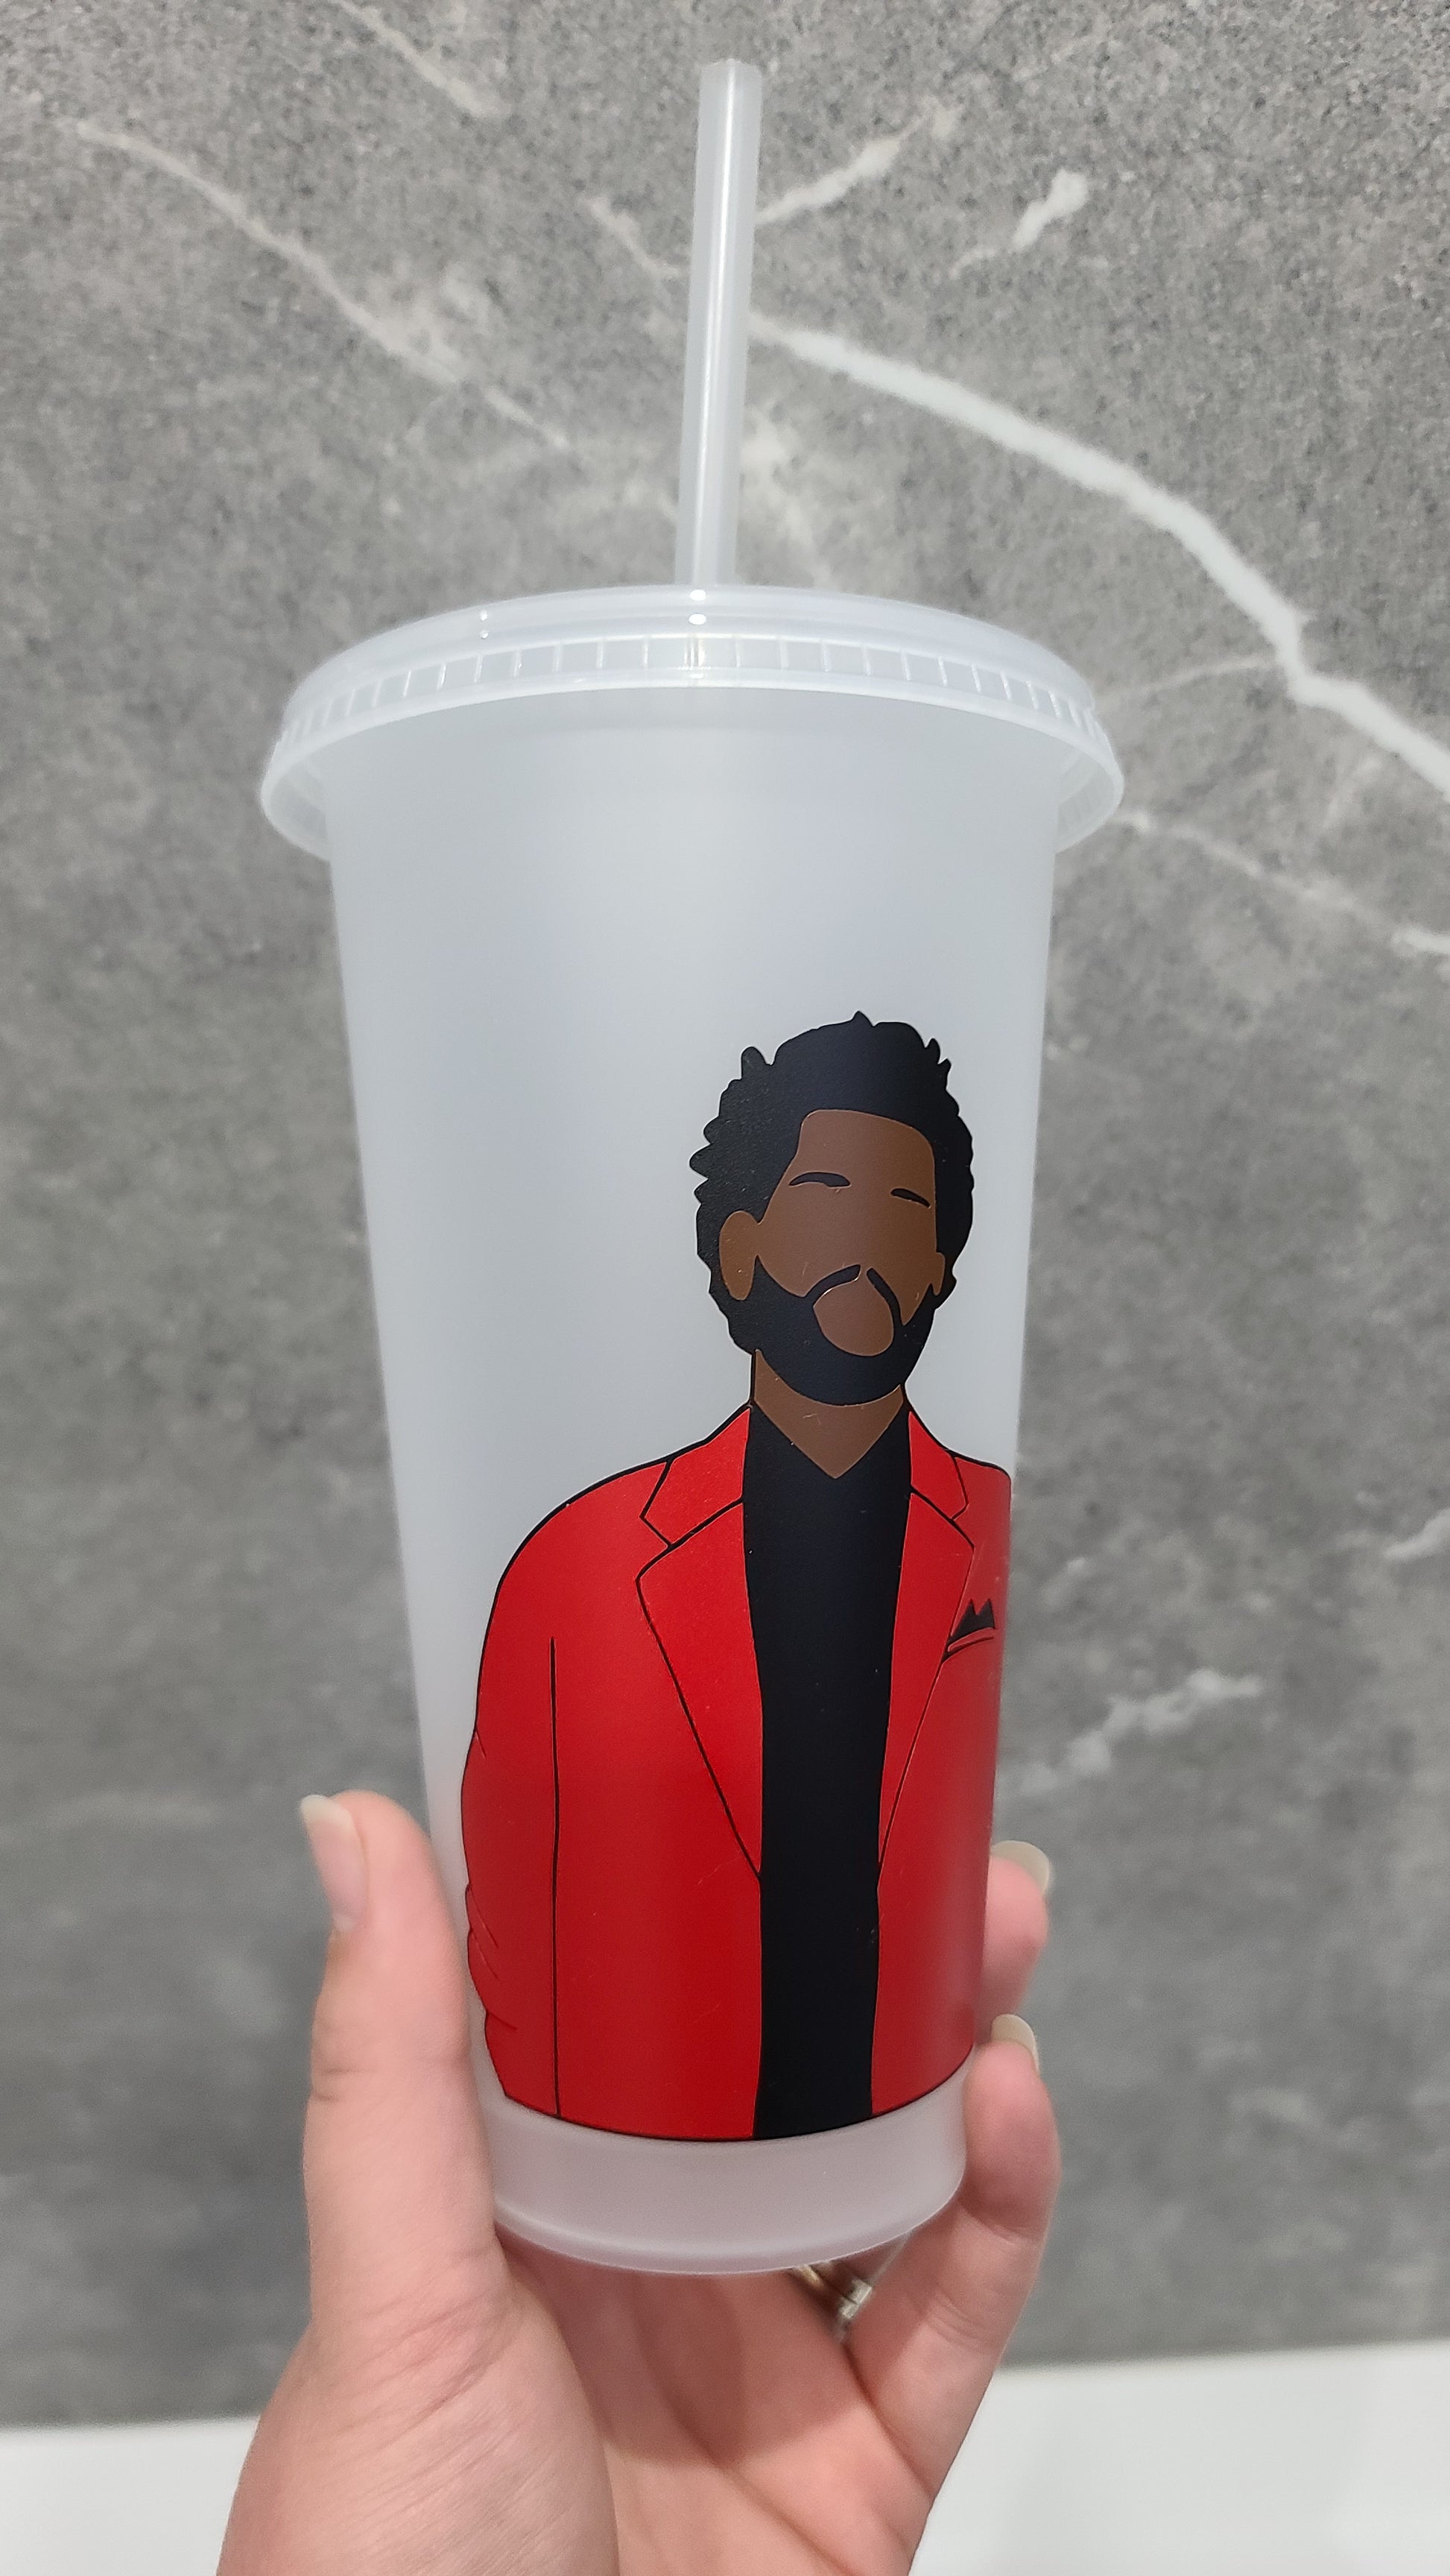 The Weekend 700ml Frosted Cold Cup Fan Merch Gift / Plastic Reusable Tumbler With Lid and straw / Krissi's Creations